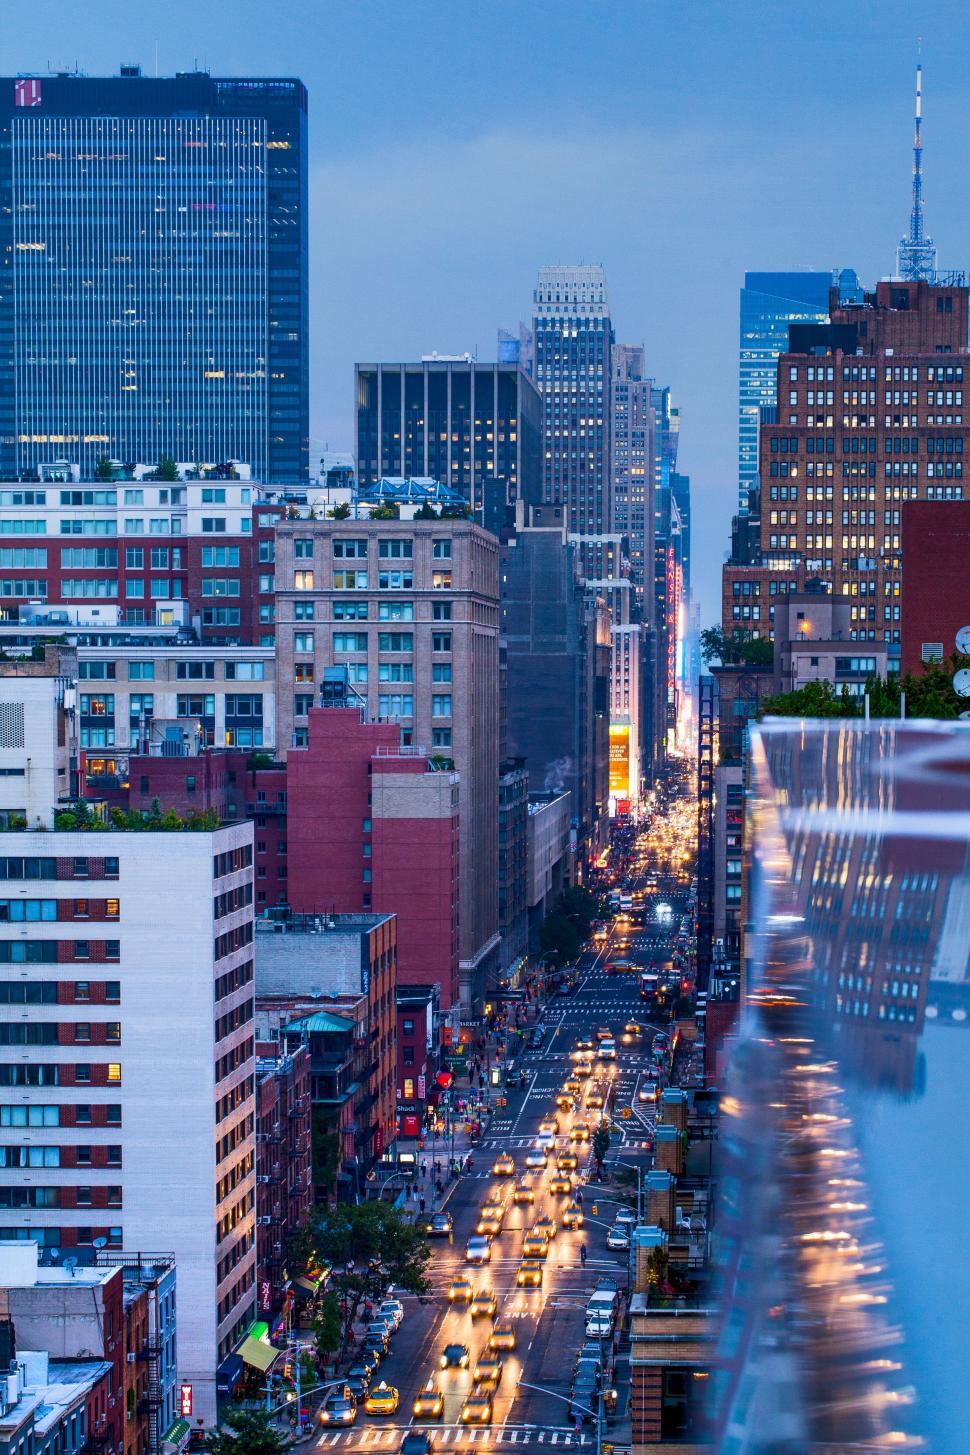 Free Image of Busy City Street With Traffic and Tall Buildings 